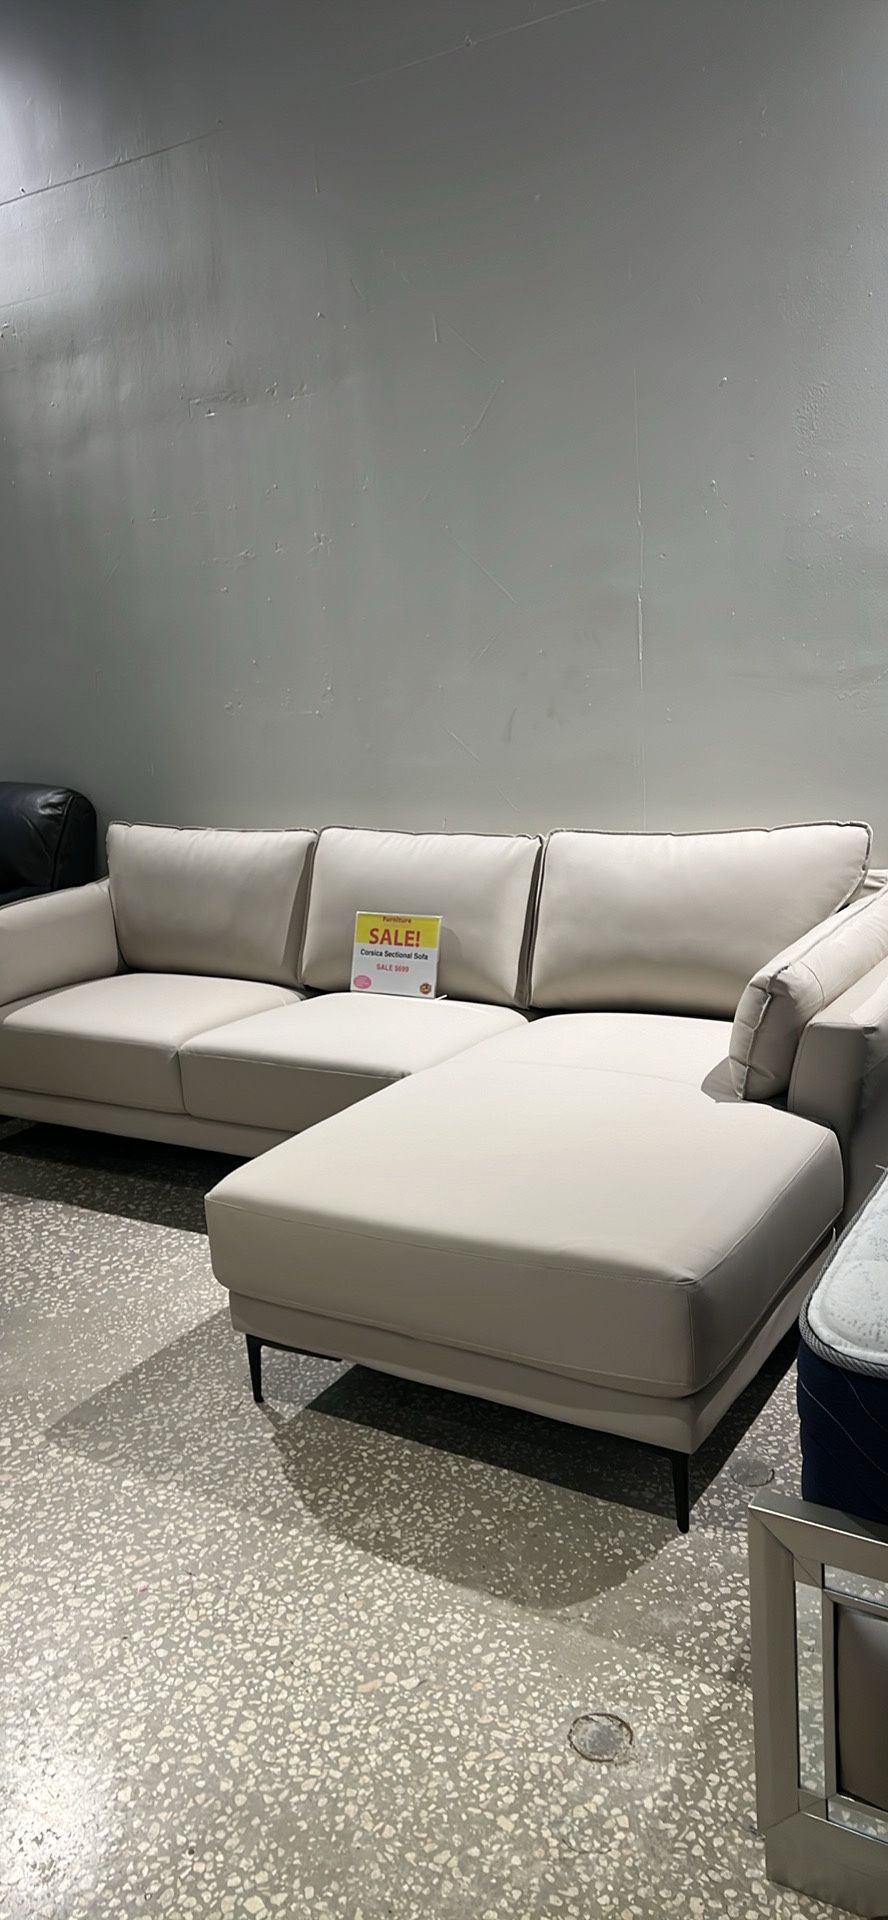 BEAUTIFUL CORSICA BEIGE SECTIONAL SOFA!$699!*SAME DAY DELIVERY*NO CREDIT NEEDED*EASY FINANCING*HUGE SALE*